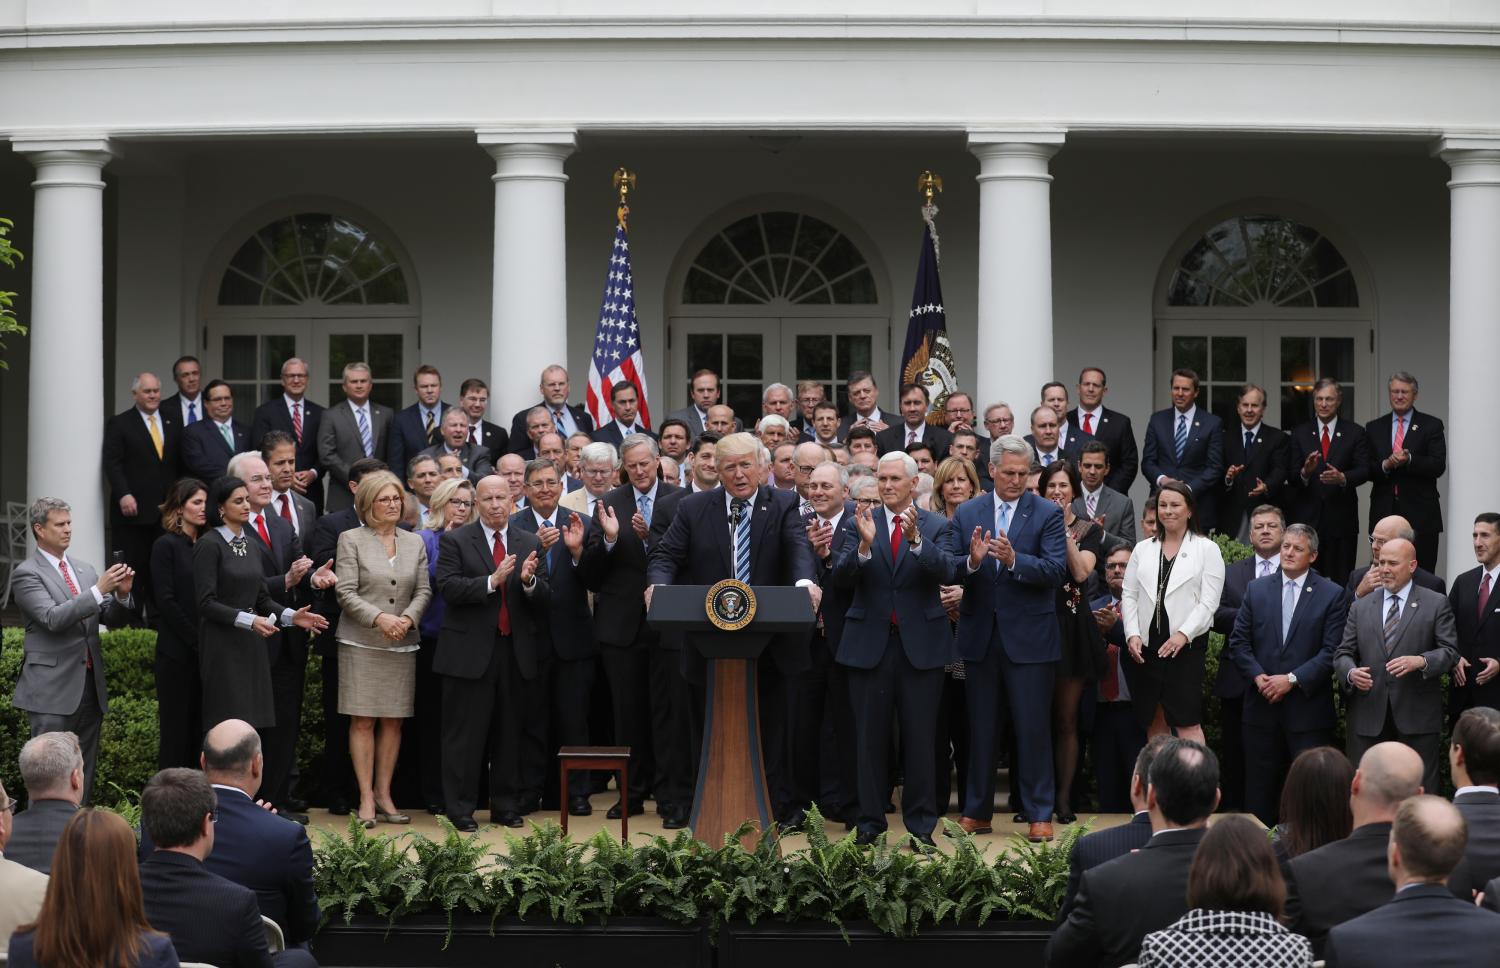 REUTERS/Carlos Barria - President Donald Trump gathers with Congressional Republicans in the Rose Garden after the House of Representatives approved the American Healthcare Act.